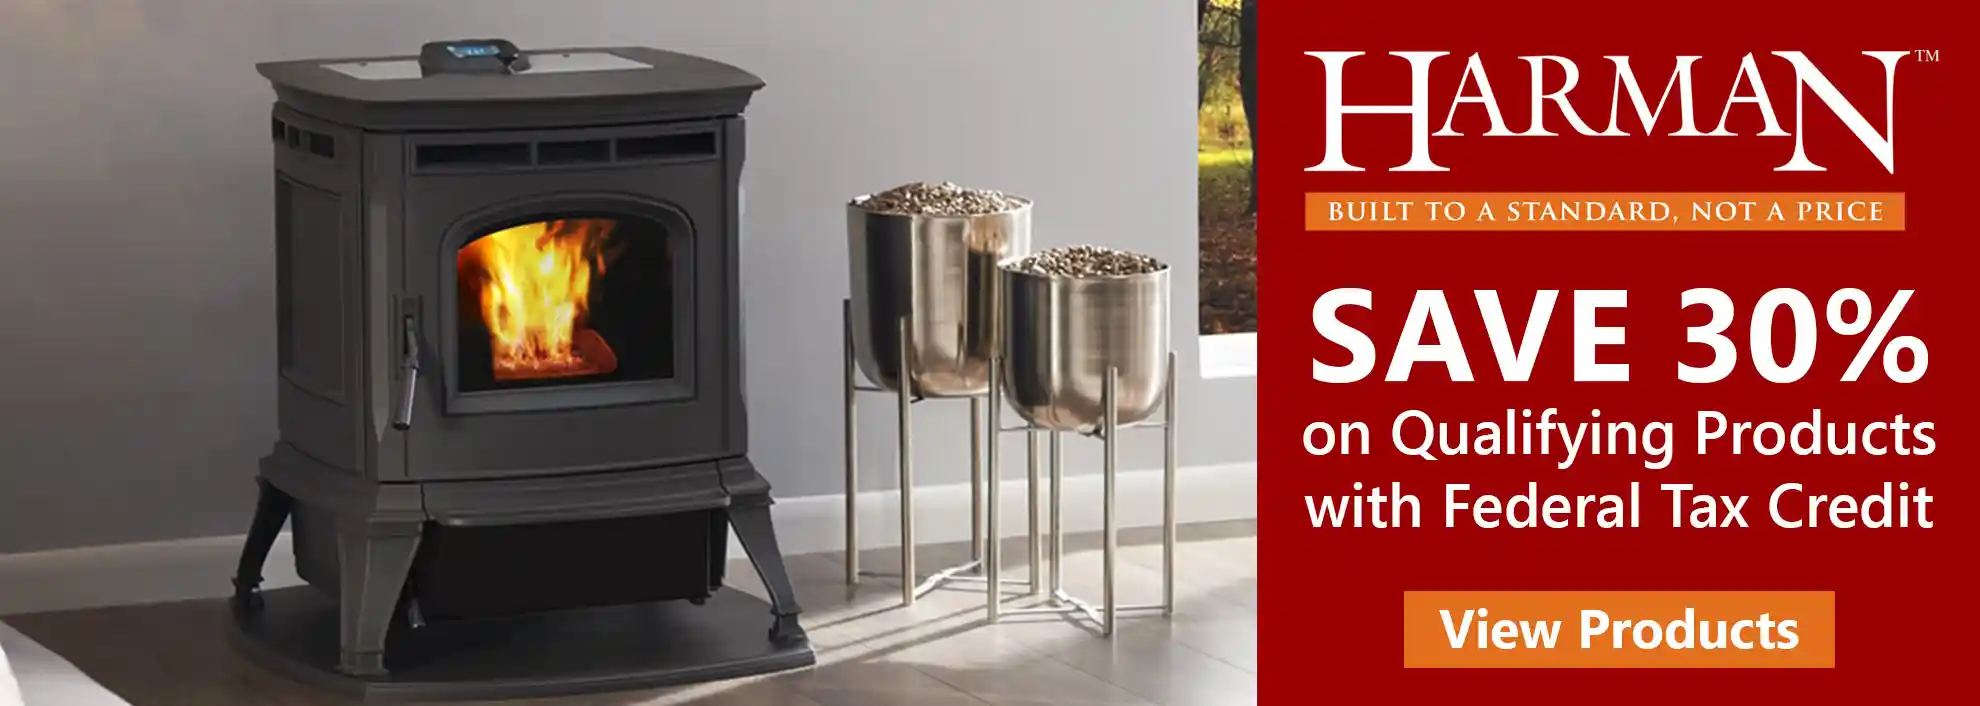 Wood Burning Stove Accessories - HubPages